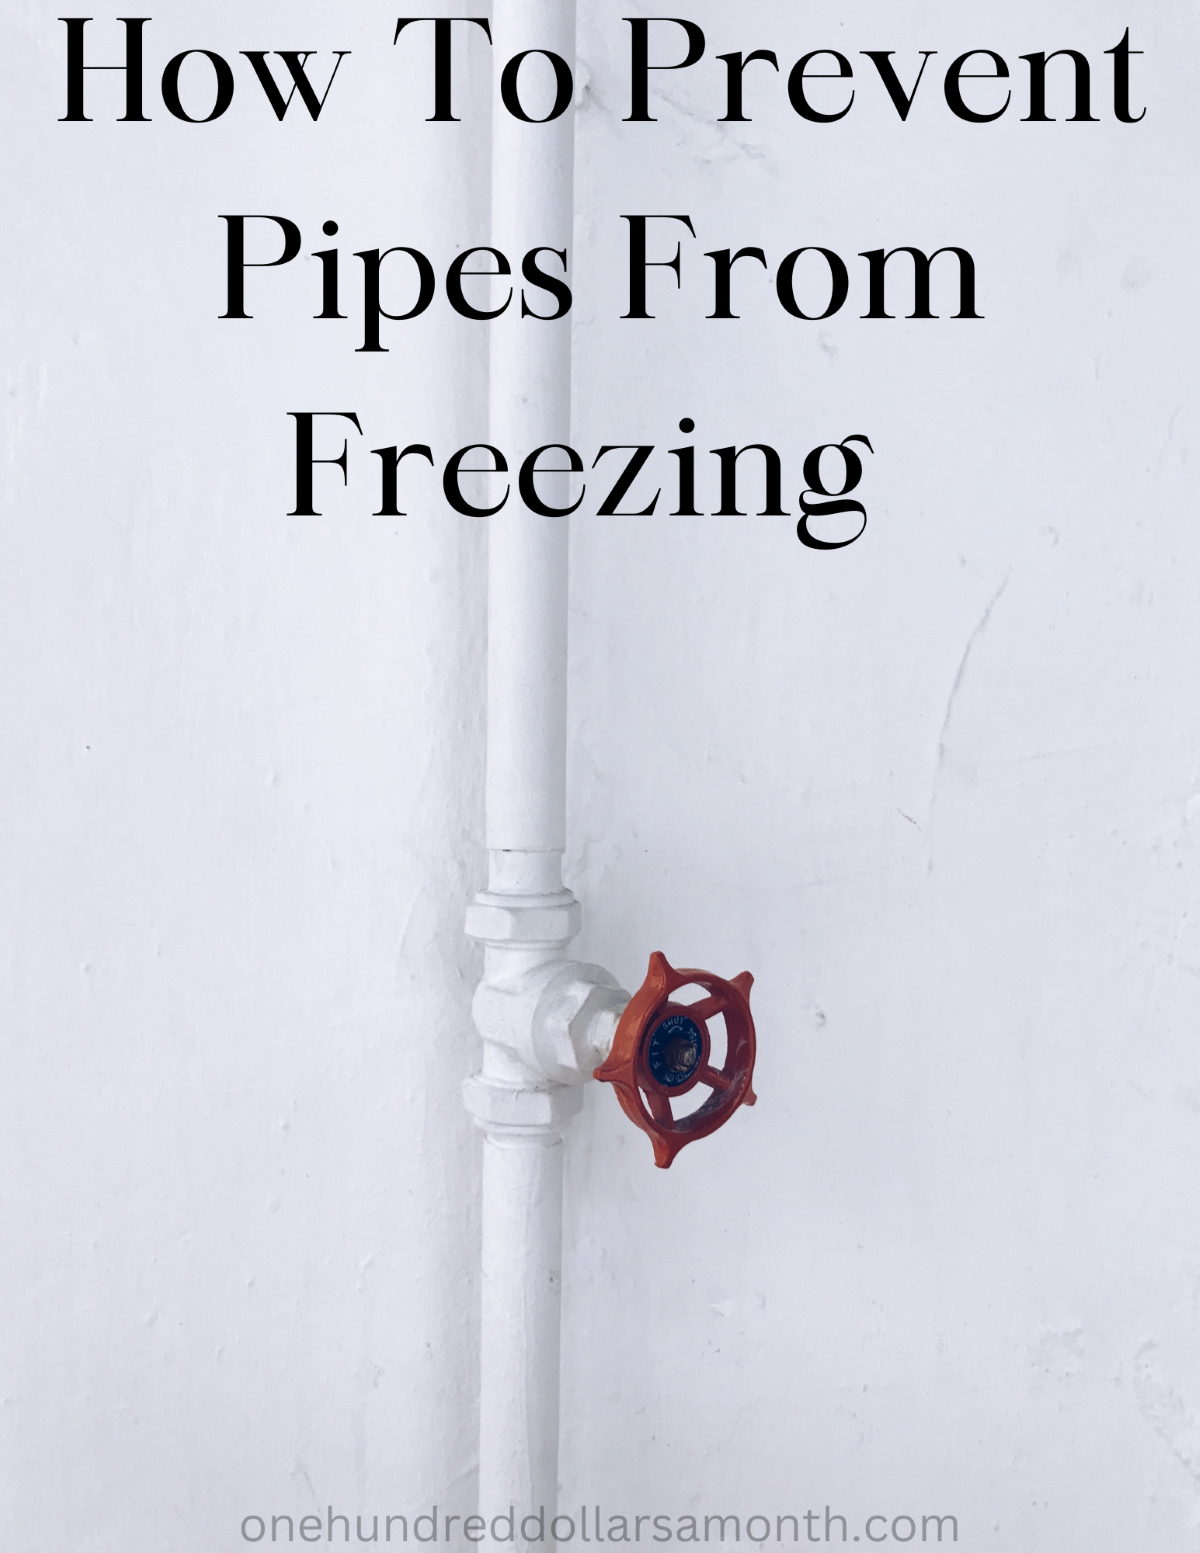 How To Prevent Pipes From Freezing